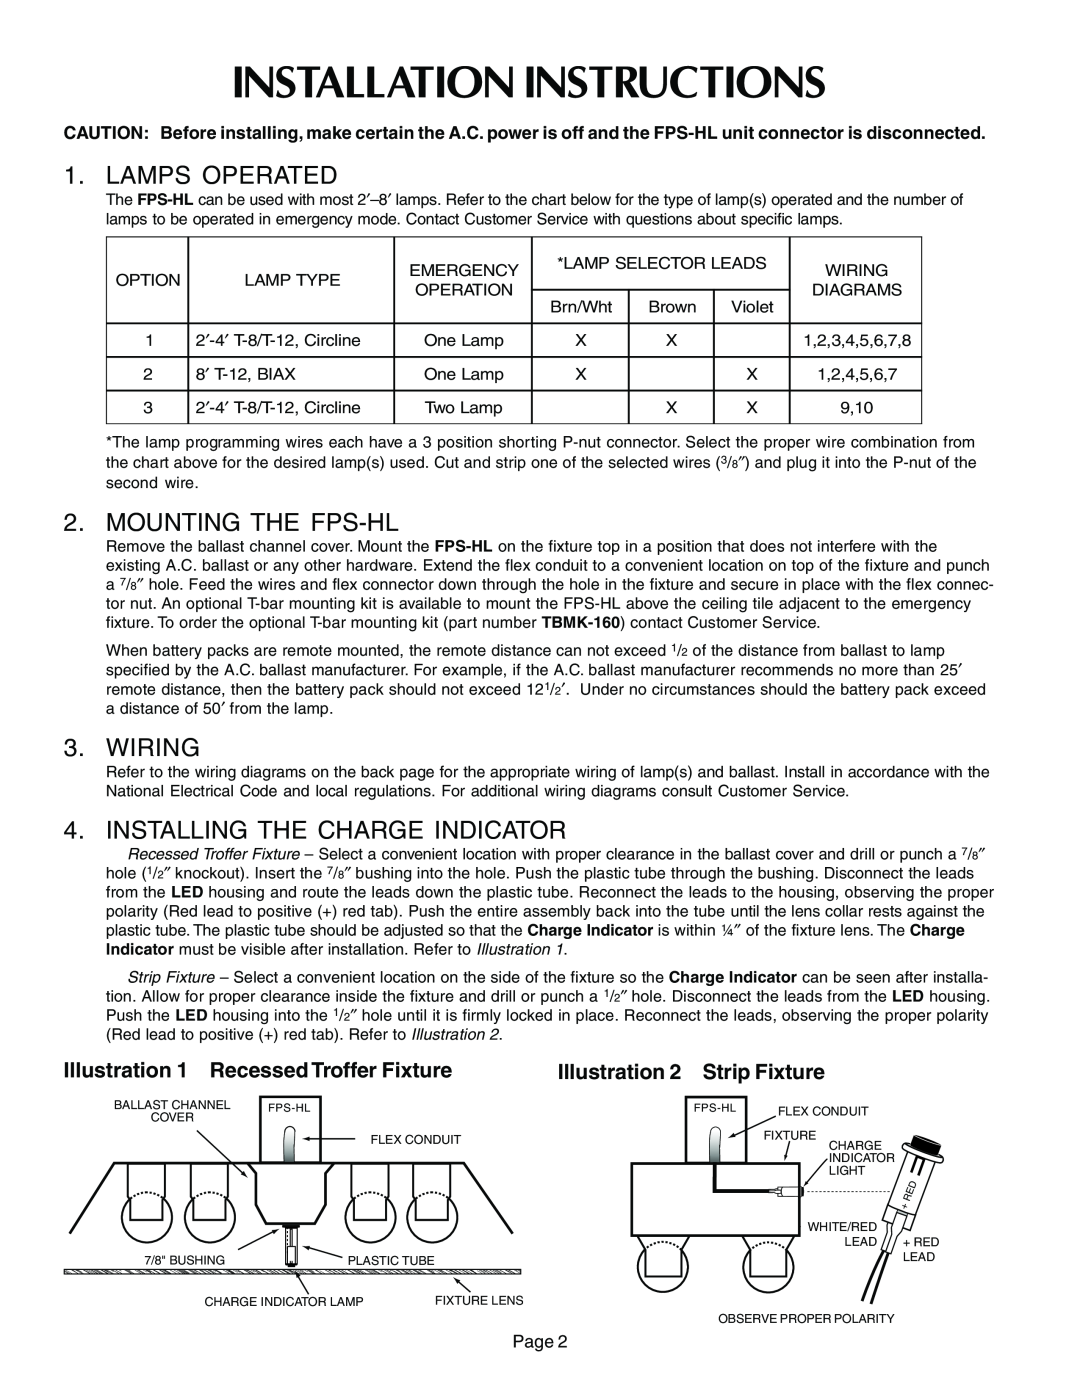 Thomas & Betts FPS-HL Installation Instructions, Lamps Operated, Mounting The Fps-Hl, Wiring, Illustration 2 Strip Fixture 